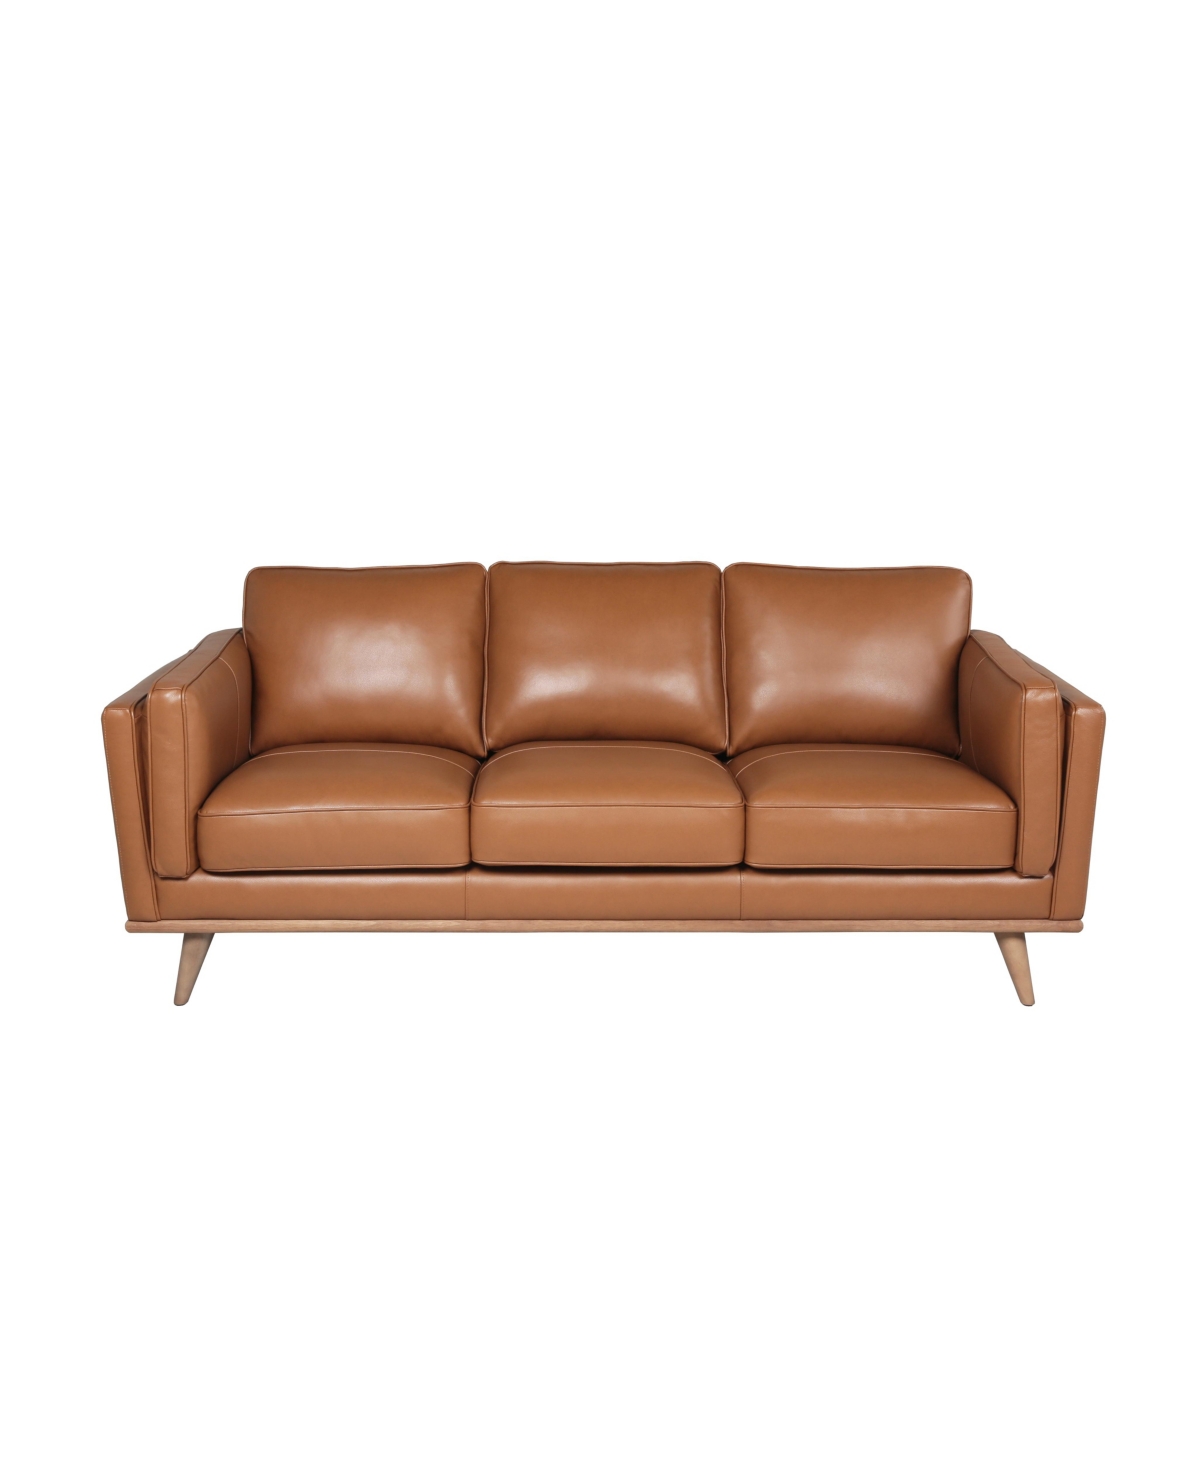 Shop Nice Link Addison 83" Mid-century Modern Leather Sofa In Camel Brown